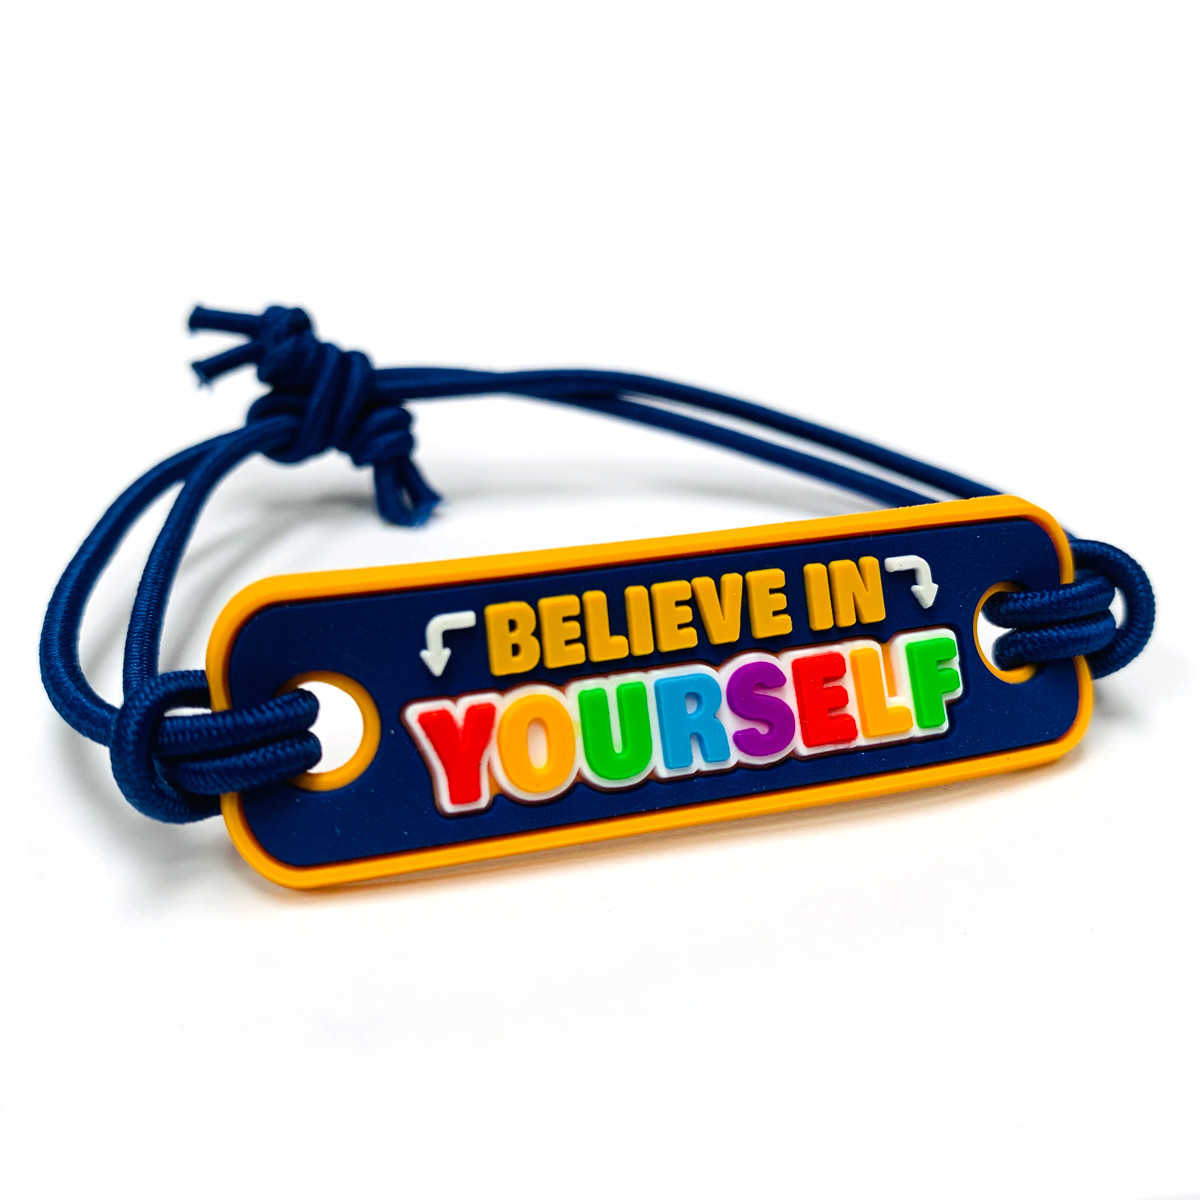 3D Bands - Believe in Yourself